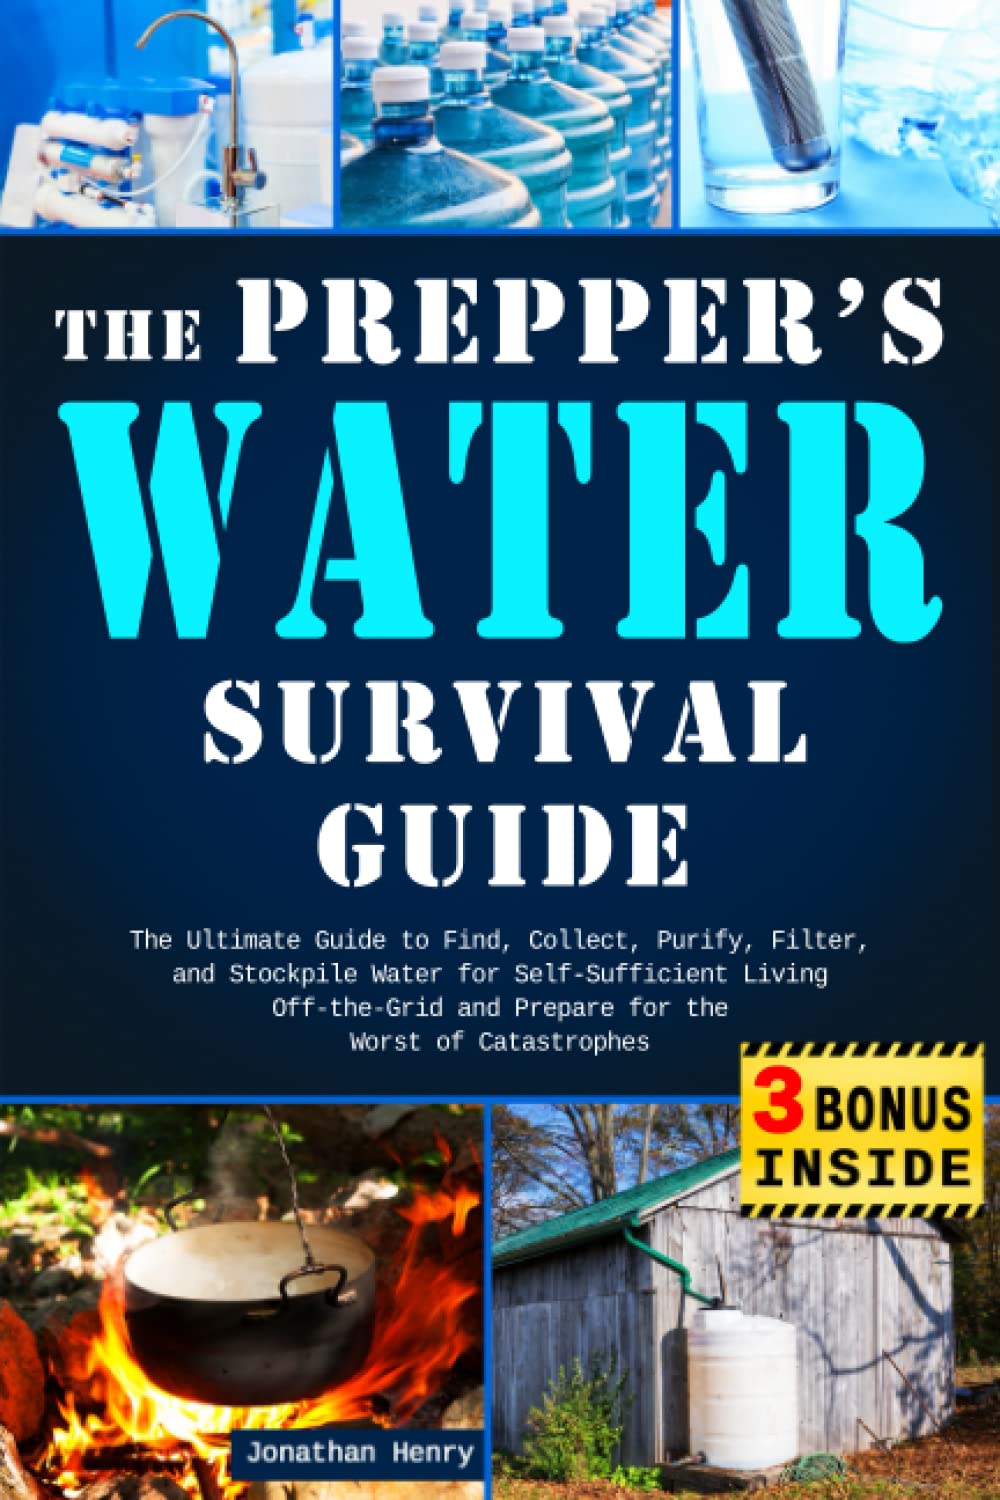 The Prepper’s Water Survival Guide: The Ultimate Guide to Find, Collect, Purify, Filter, and Stockpile Water for Self-Sufficient Living Off-the-Grid and Prepare for the Worst of Catastrophes